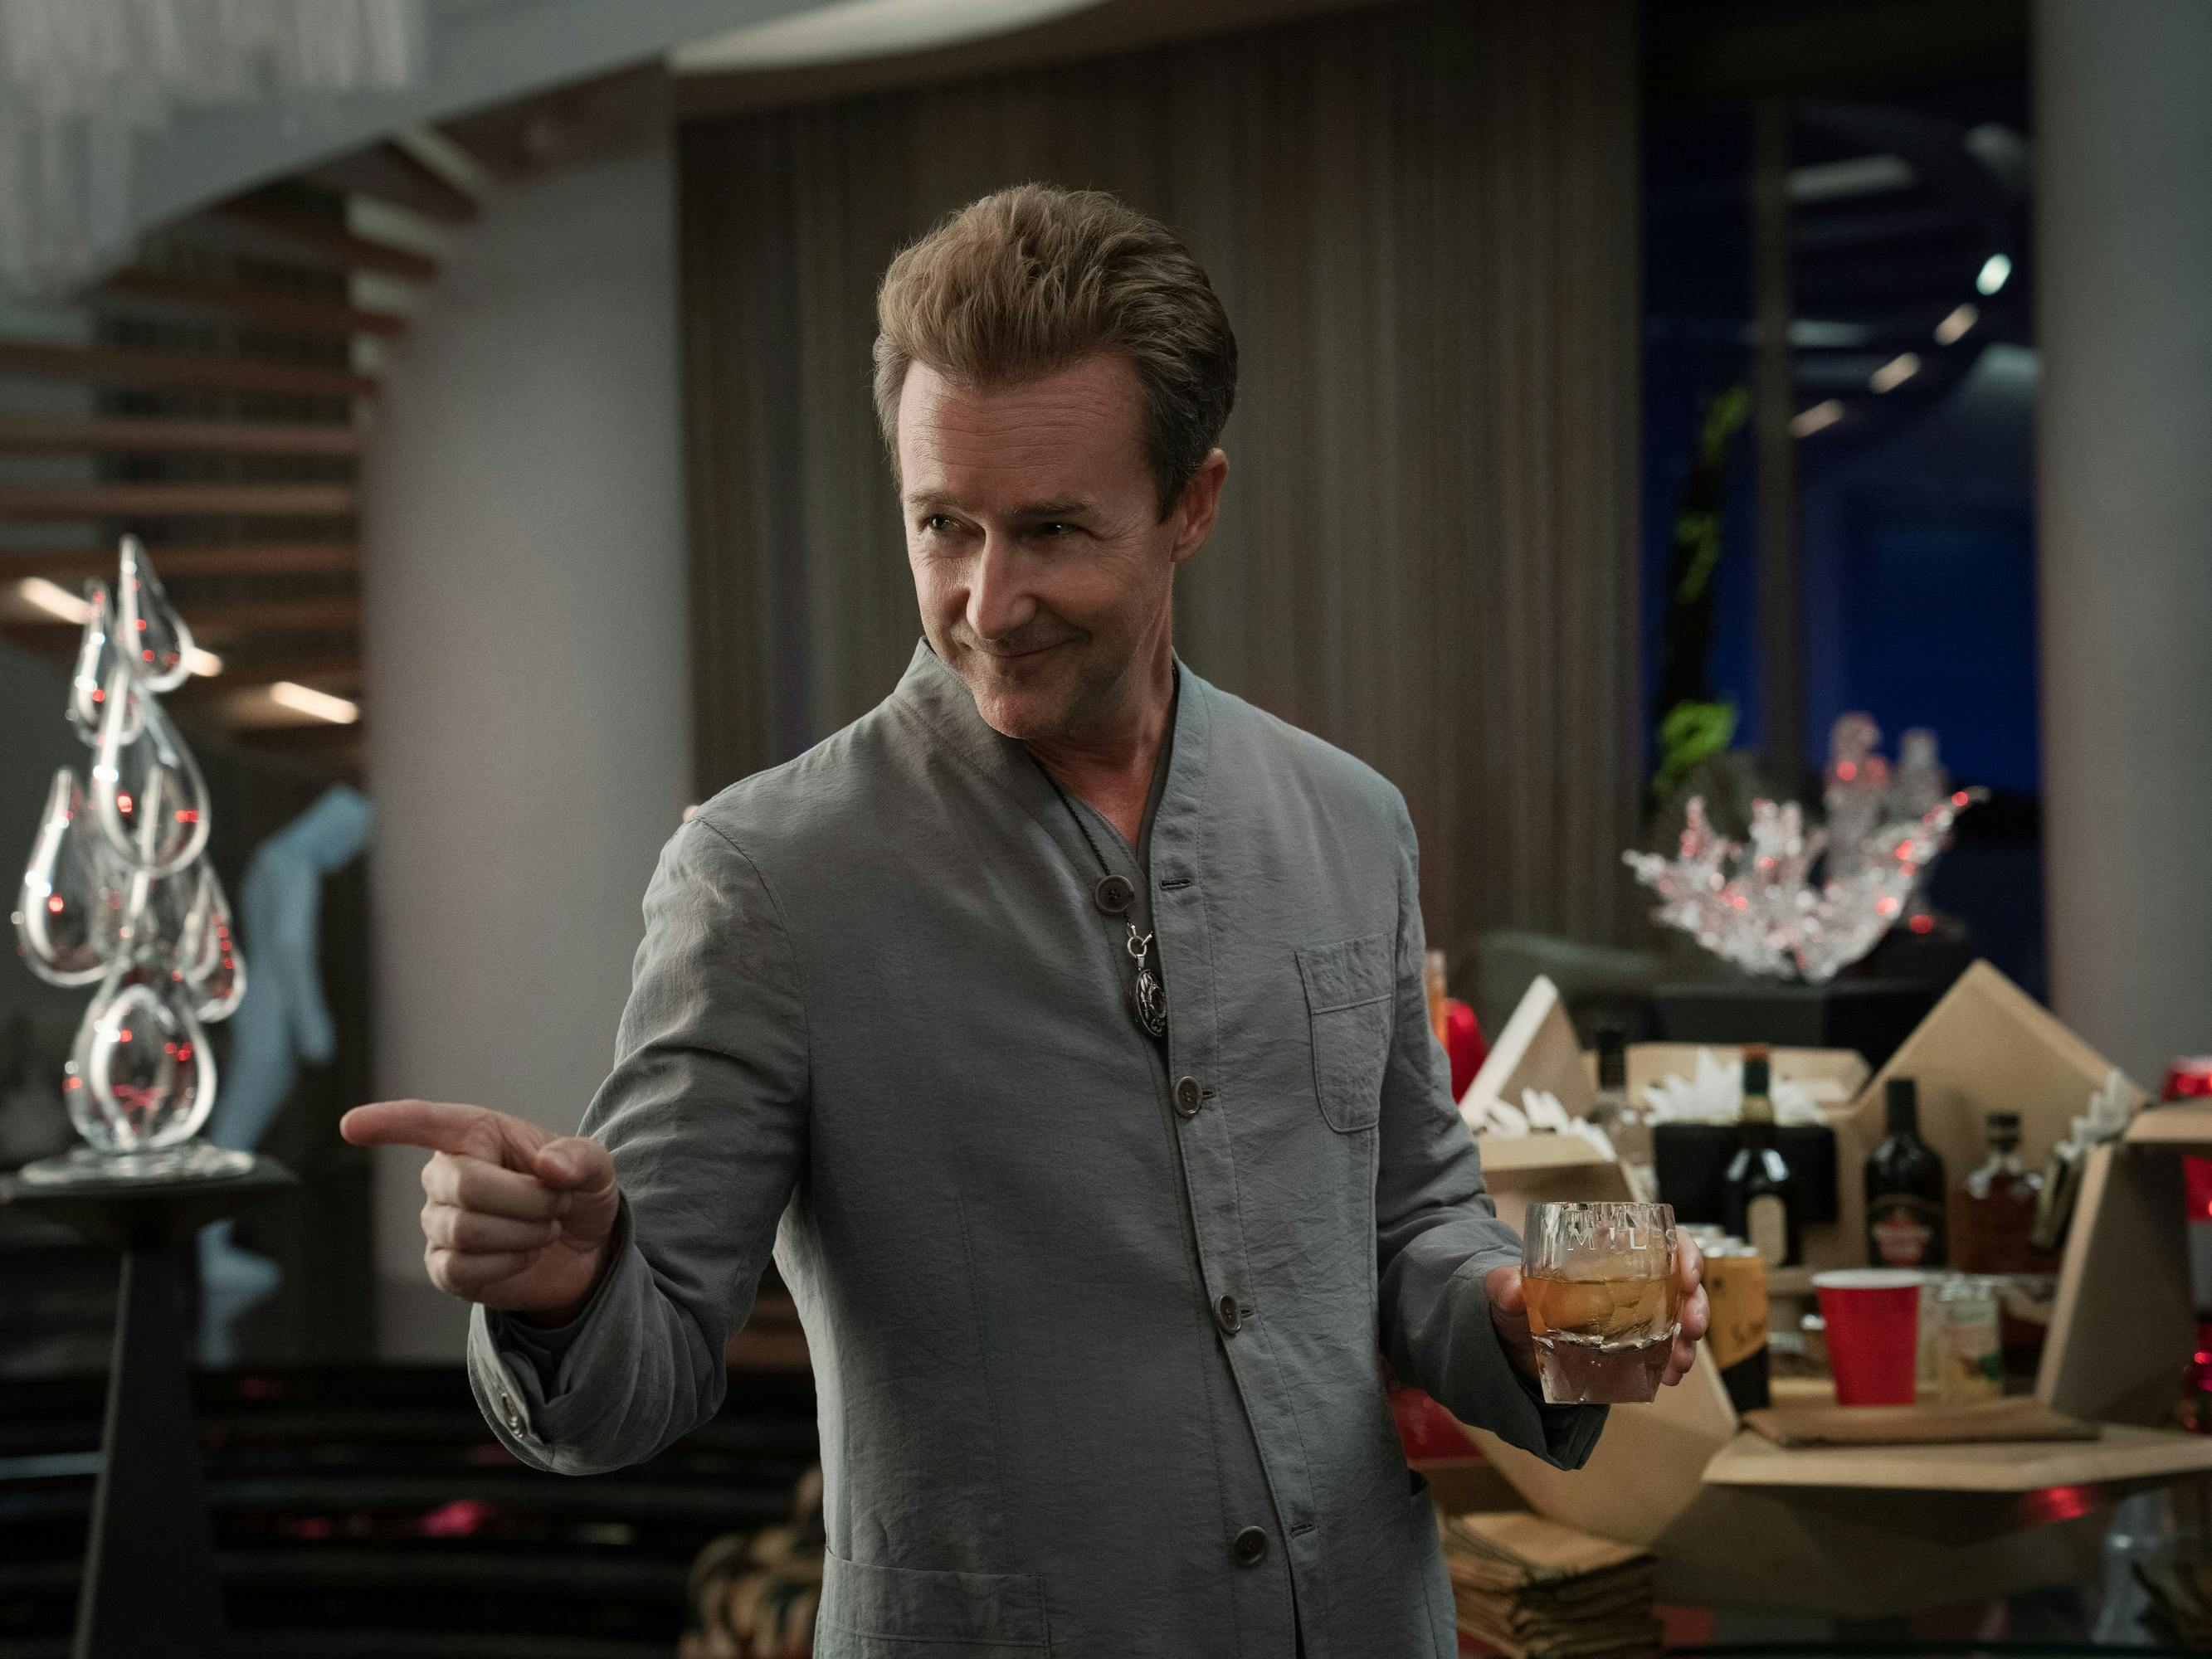 Miles Bron (Edward Norton) wears a gray top and holds a glass of brown liquor. He points slyly in someones direction.